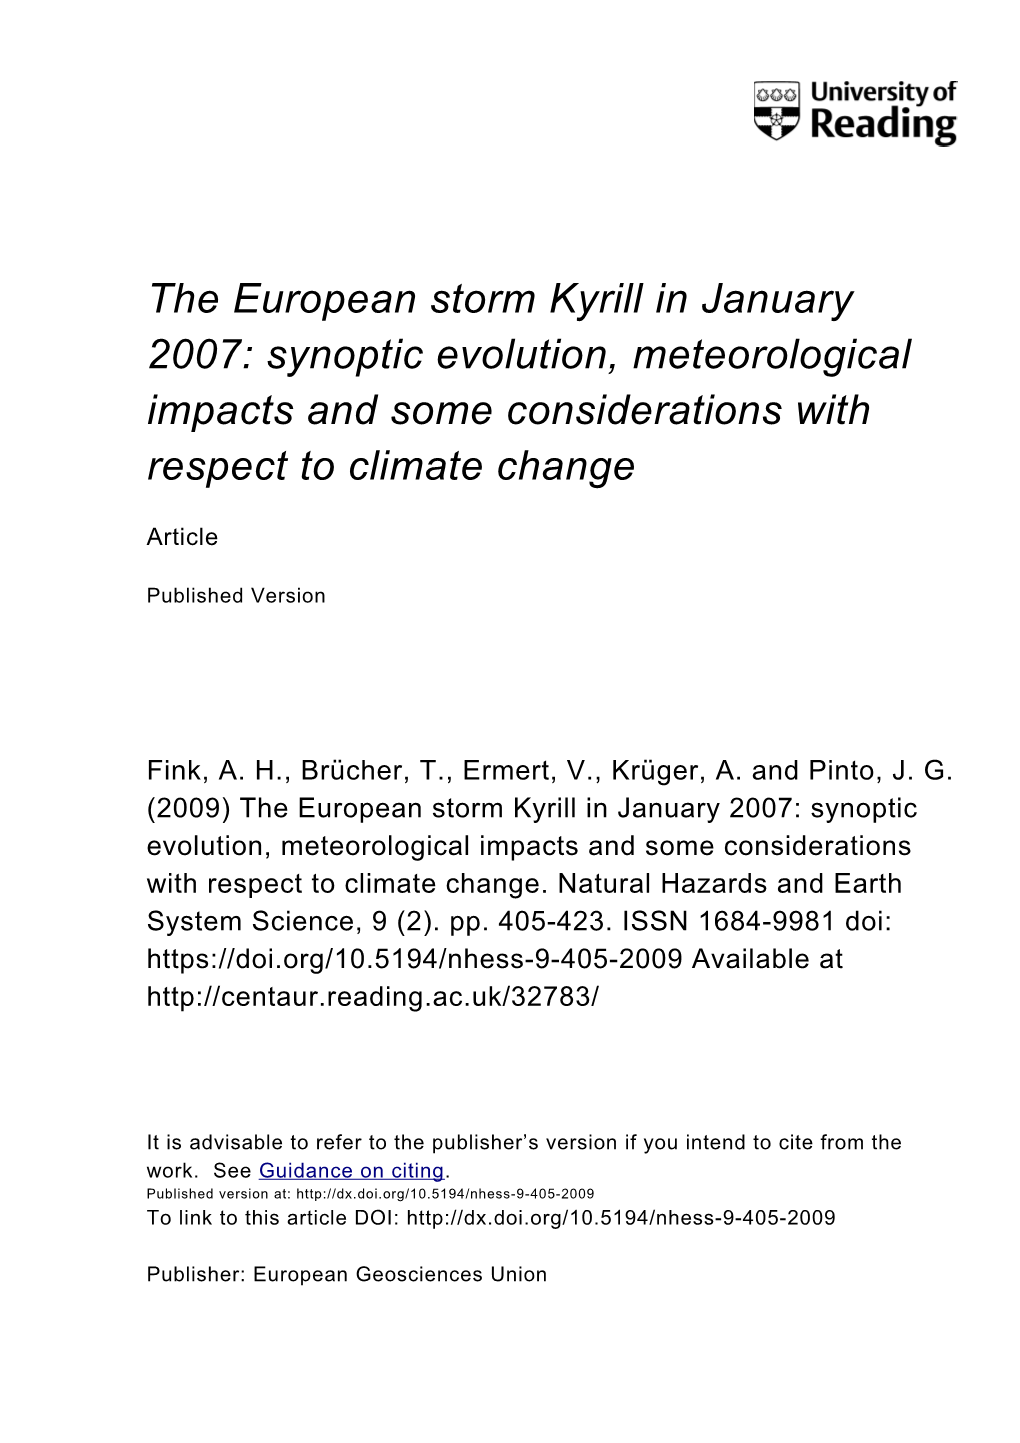 The European Storm Kyrill in January 2007: Synoptic Evolution, Meteorological Impacts and Some Considerations with Respect to Climate Change